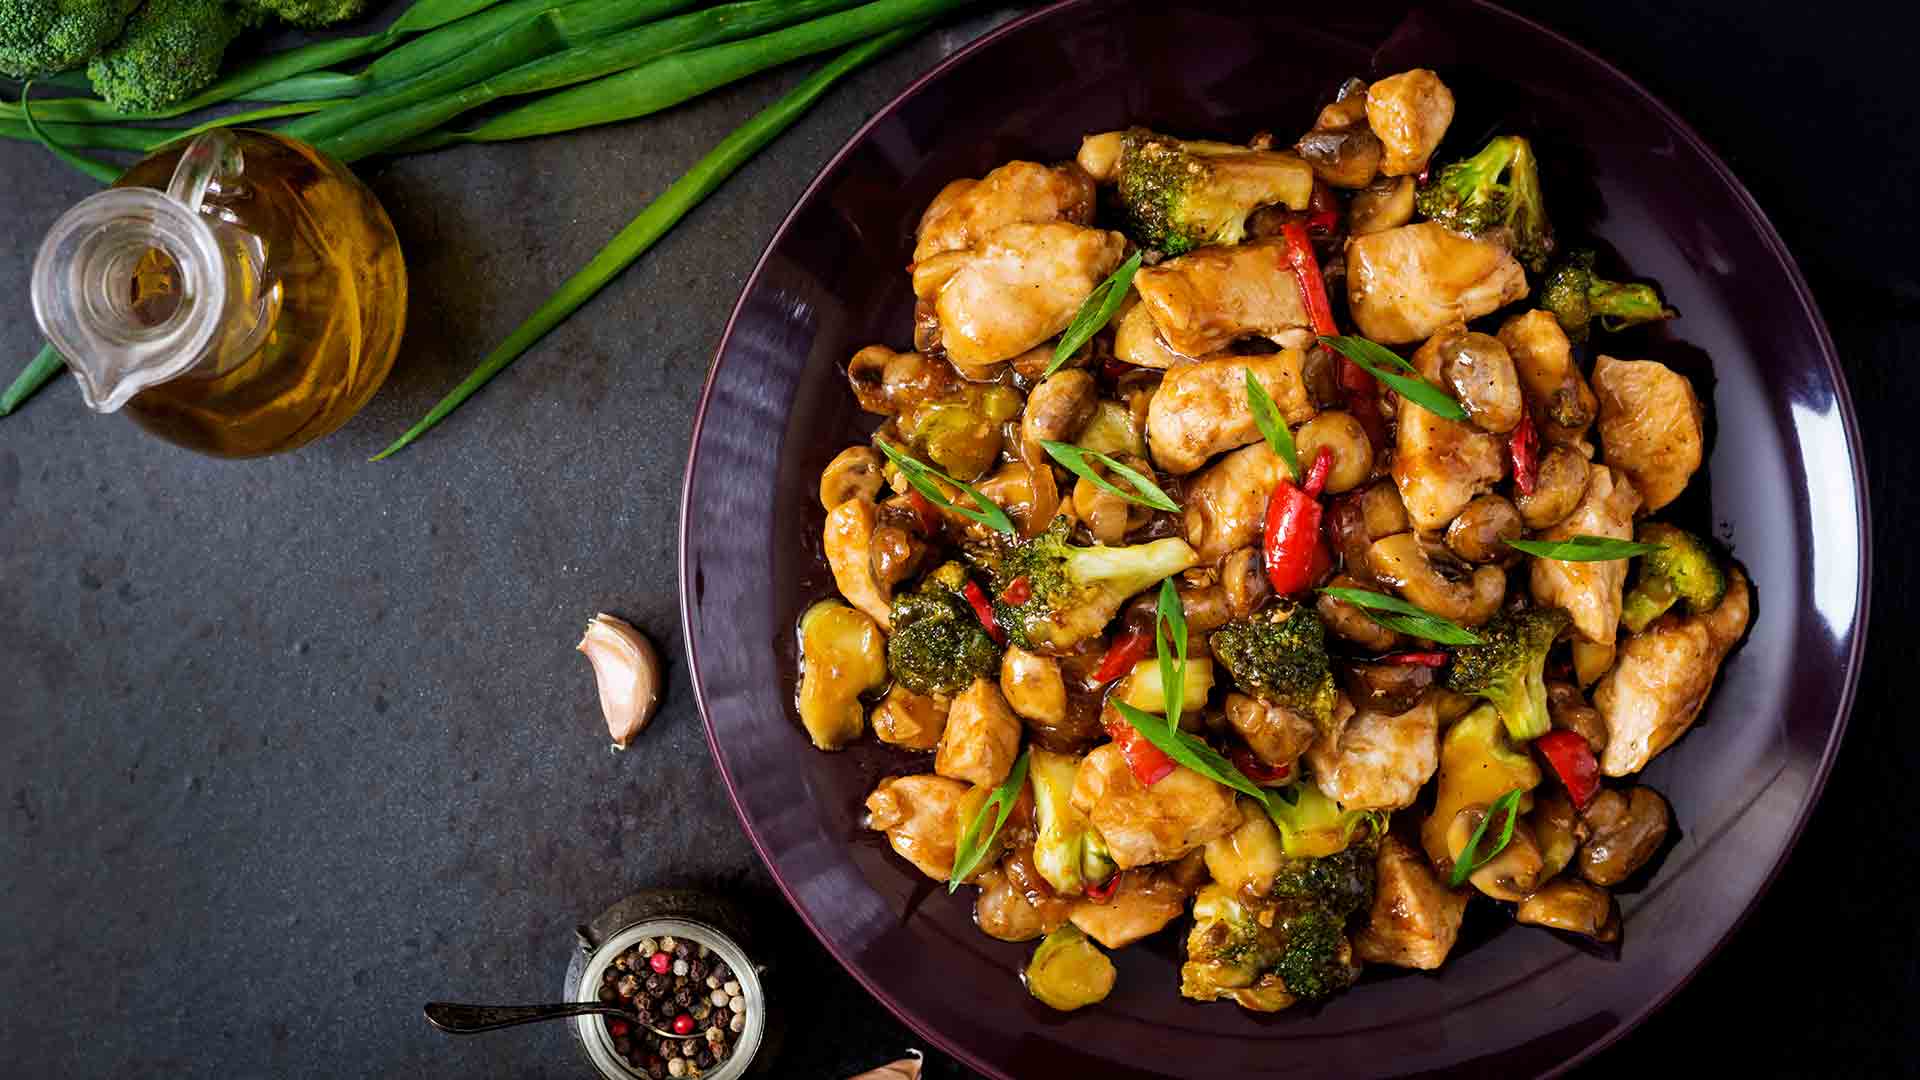 Stir fry chicken with ginger and scallions